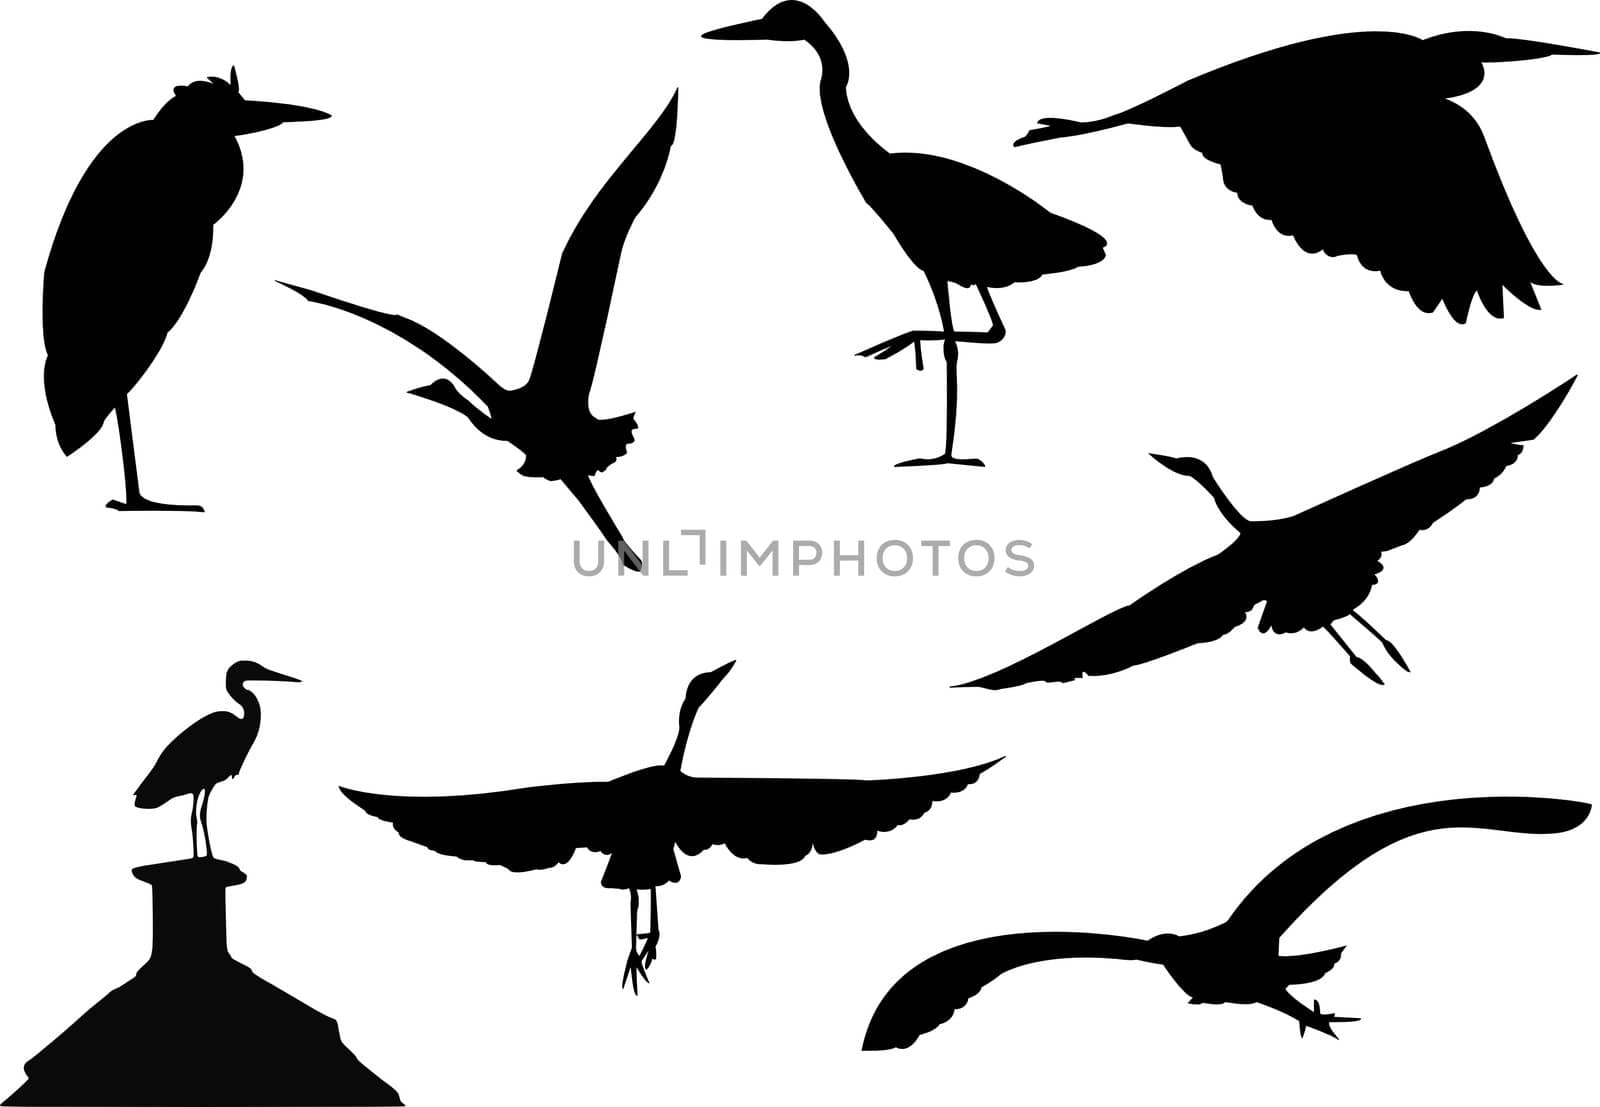 Rasterised version of a vector image of several silhouettes of wild grey heron birds